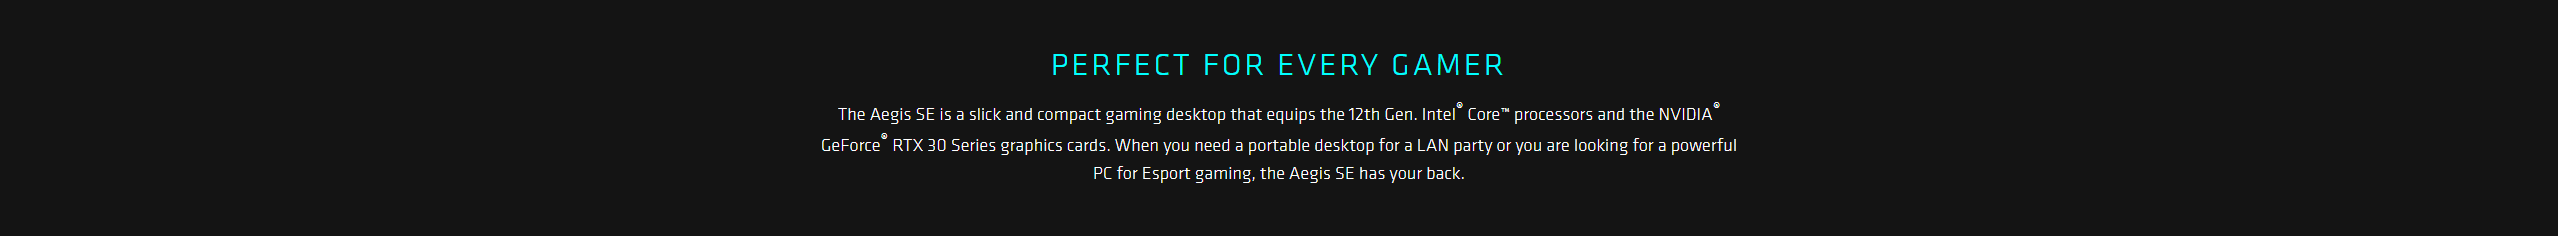 The Aegis SE is a slick and compact gaming desktop that equips the 12th Gen. Intel® Core™ processors and the NVIDIA® GeForce® RTX 30 Series graphics cards. When you need a portable desktop for a LAN party or you are looking for a powerful PC for Esport gaming, the Aegis SE has your back.